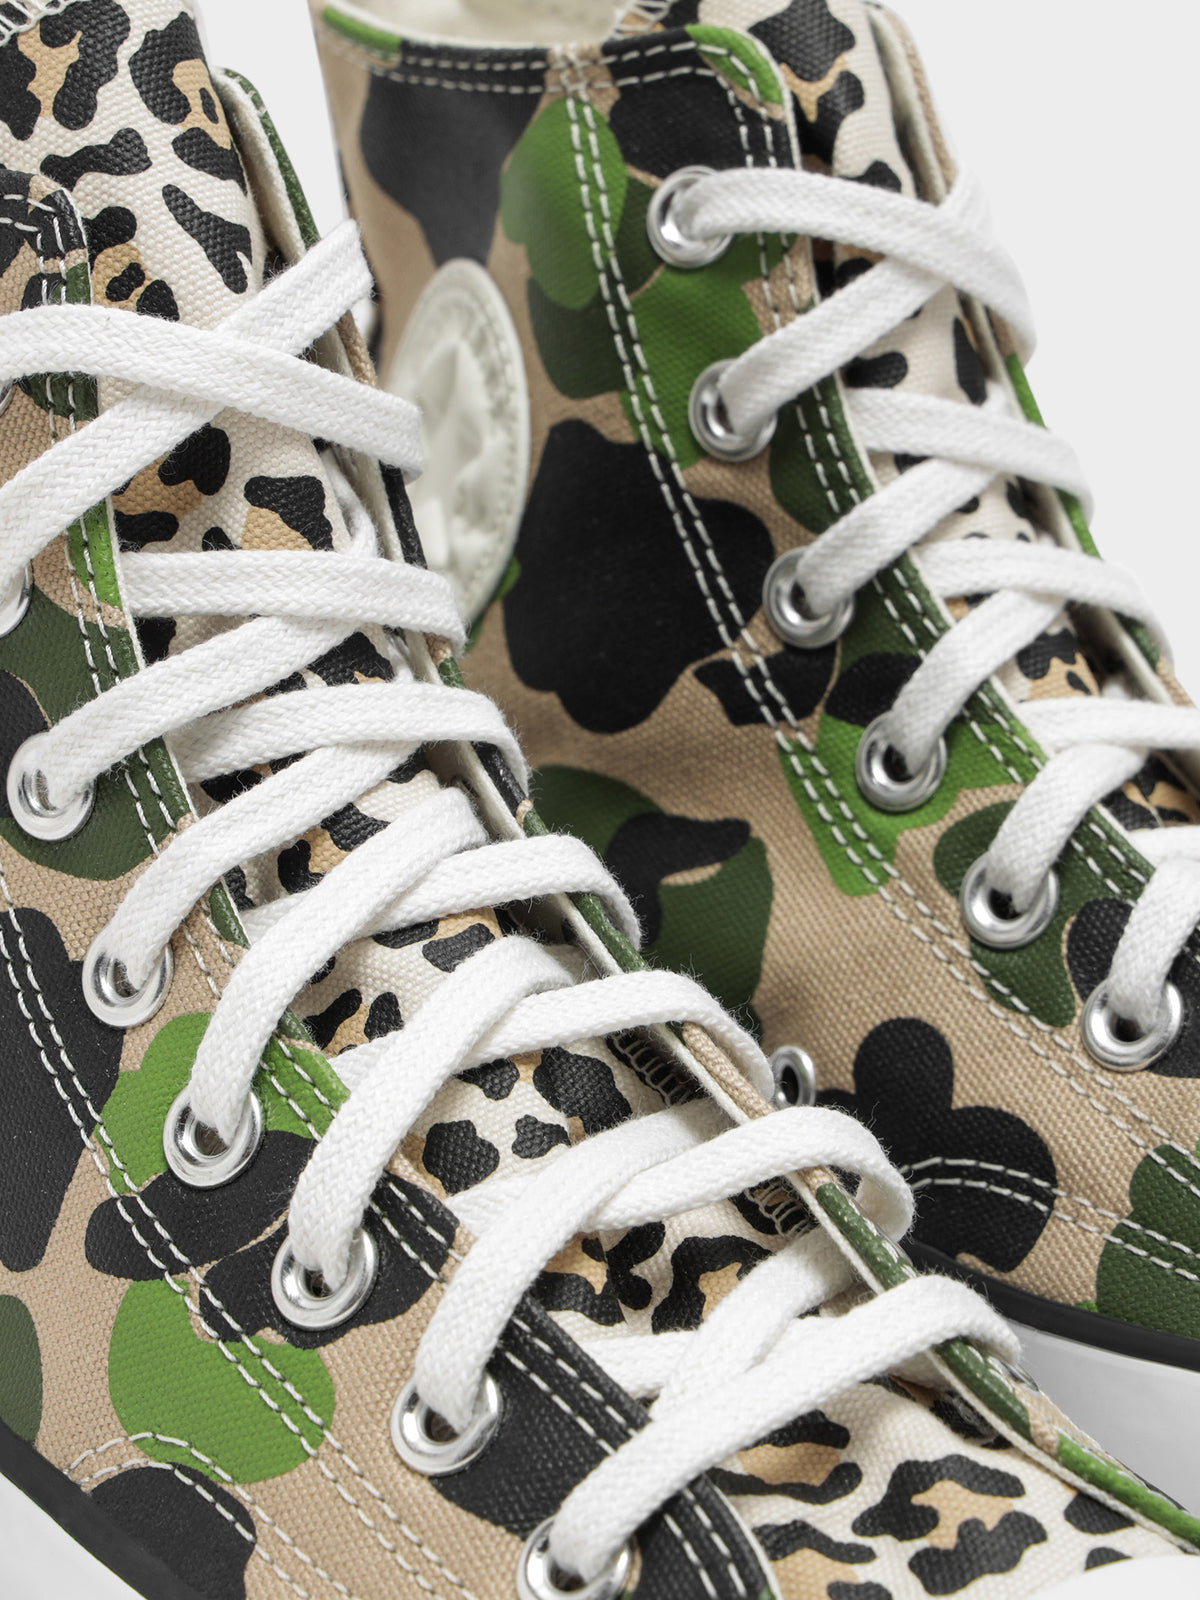 Womens Run Star Hike Archive Gone Wild in Piquant Green Camo